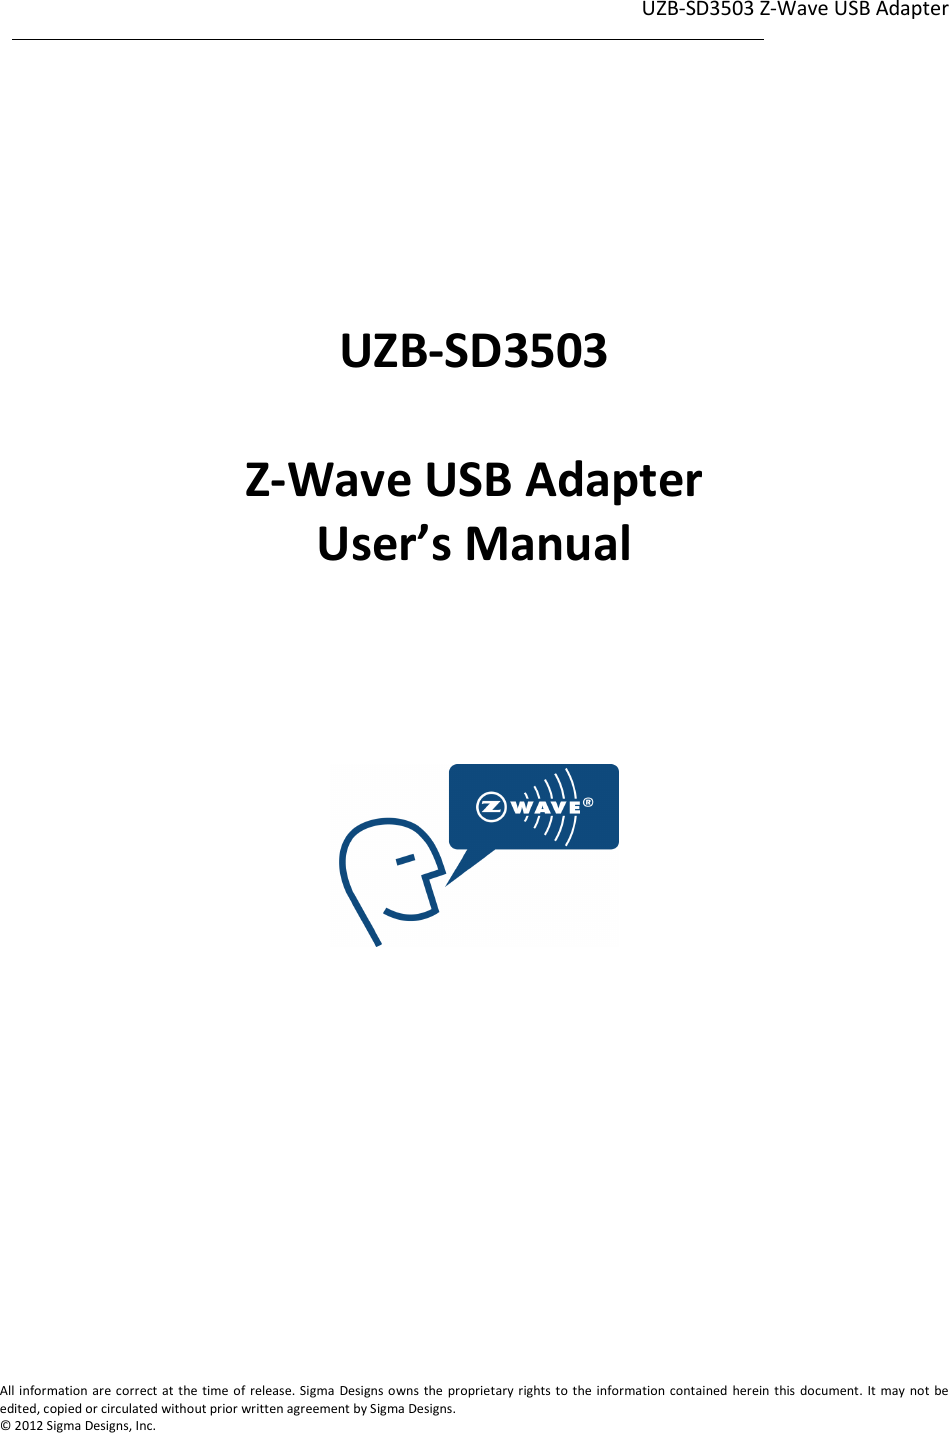 UZB-SD3503 Z-Wave USB Adapter  1                                                                                                                                                                                                             1             All information are correct at the time of release. Sigma  Designs owns  the proprietary rights to the information contained herein this document. It  may not  be edited, copied or circulated without prior written agreement by Sigma Designs.   © 2012 Sigma Designs, Inc.       UZB-SD3503  Z-Wave USB Adapter User’s Manual        